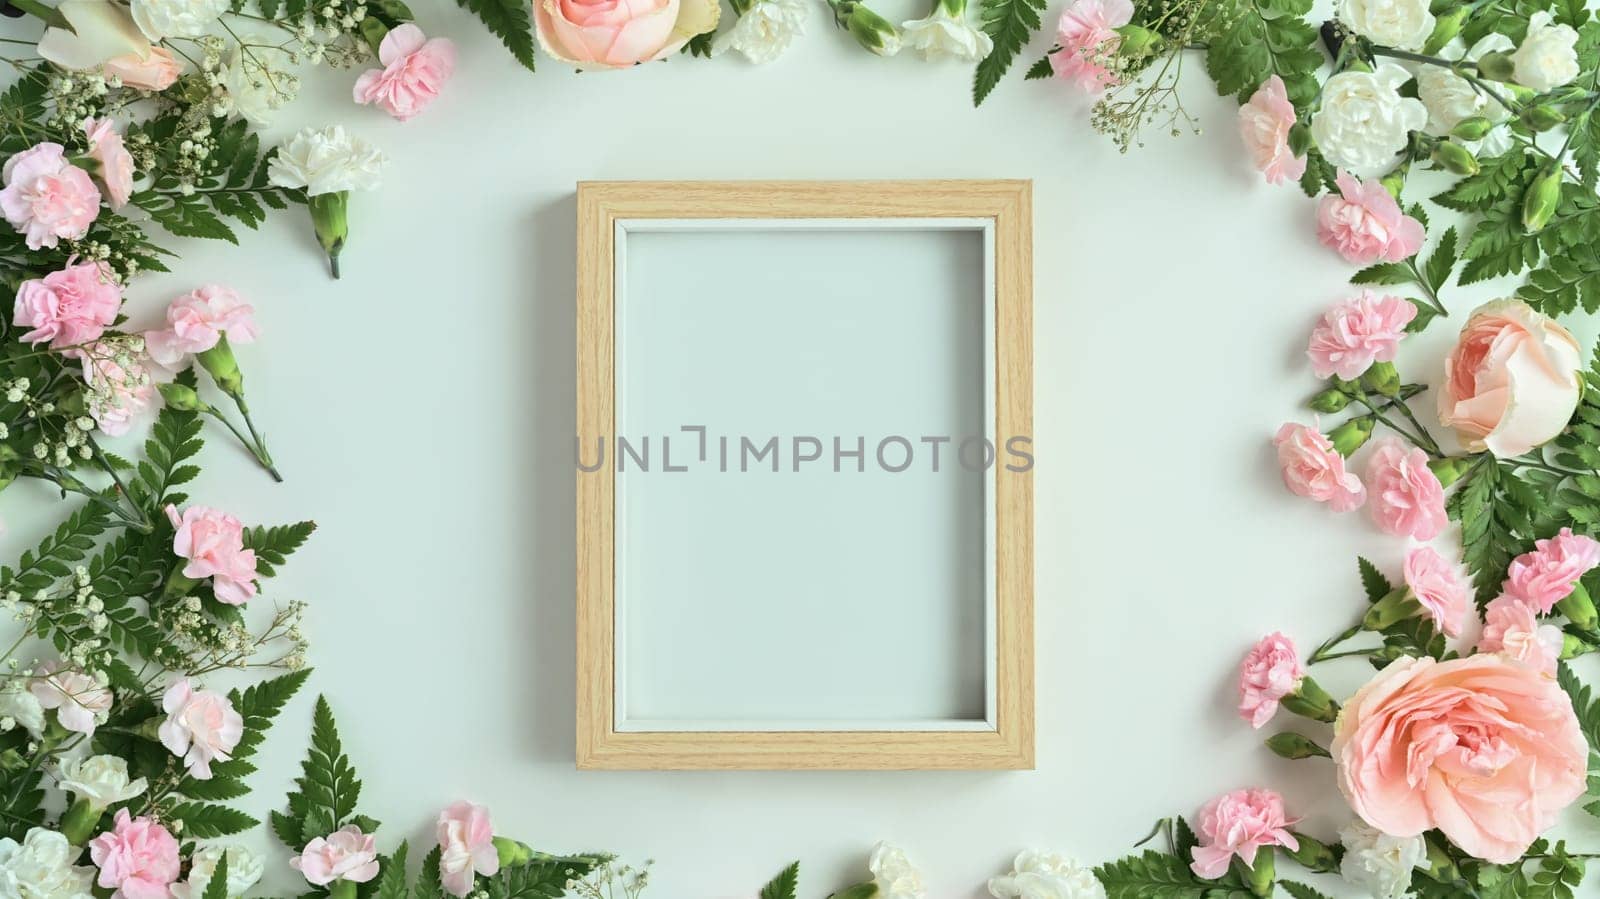 Blank wooden picture frame with pink rose, carnation and fern leaves on white background. Spring floral background by prathanchorruangsak